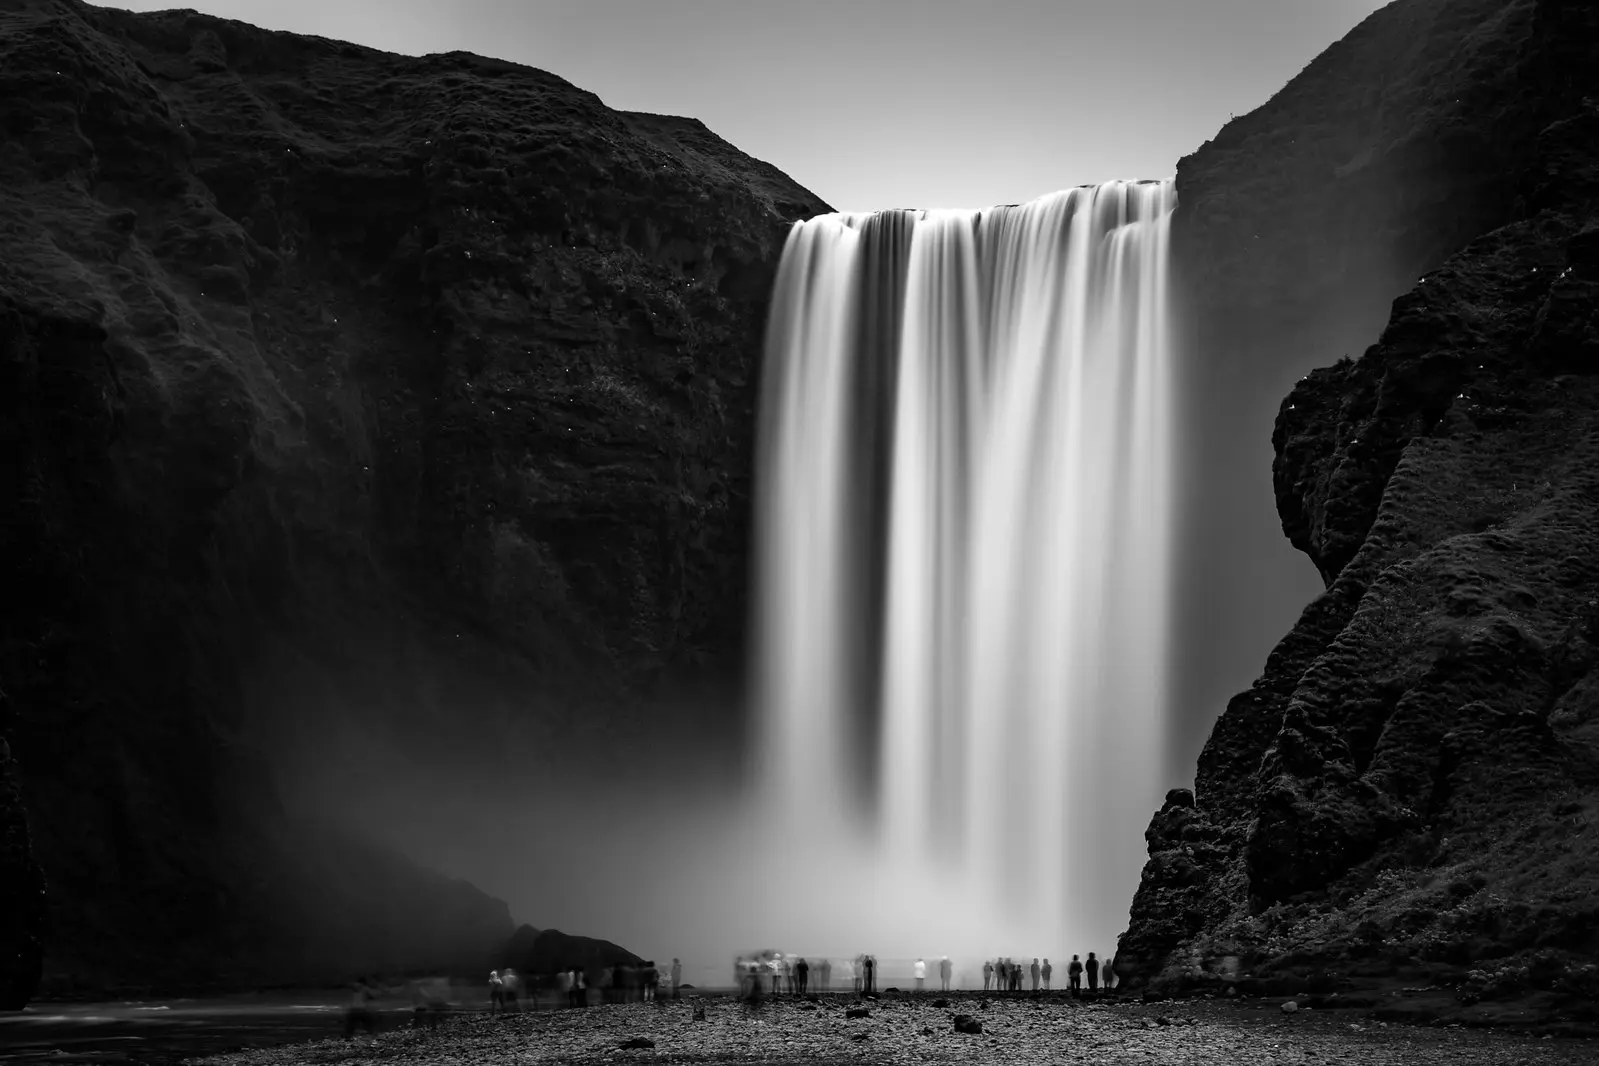 15 Amazing Black & White Landscape Photos That Will Leave You in Awe